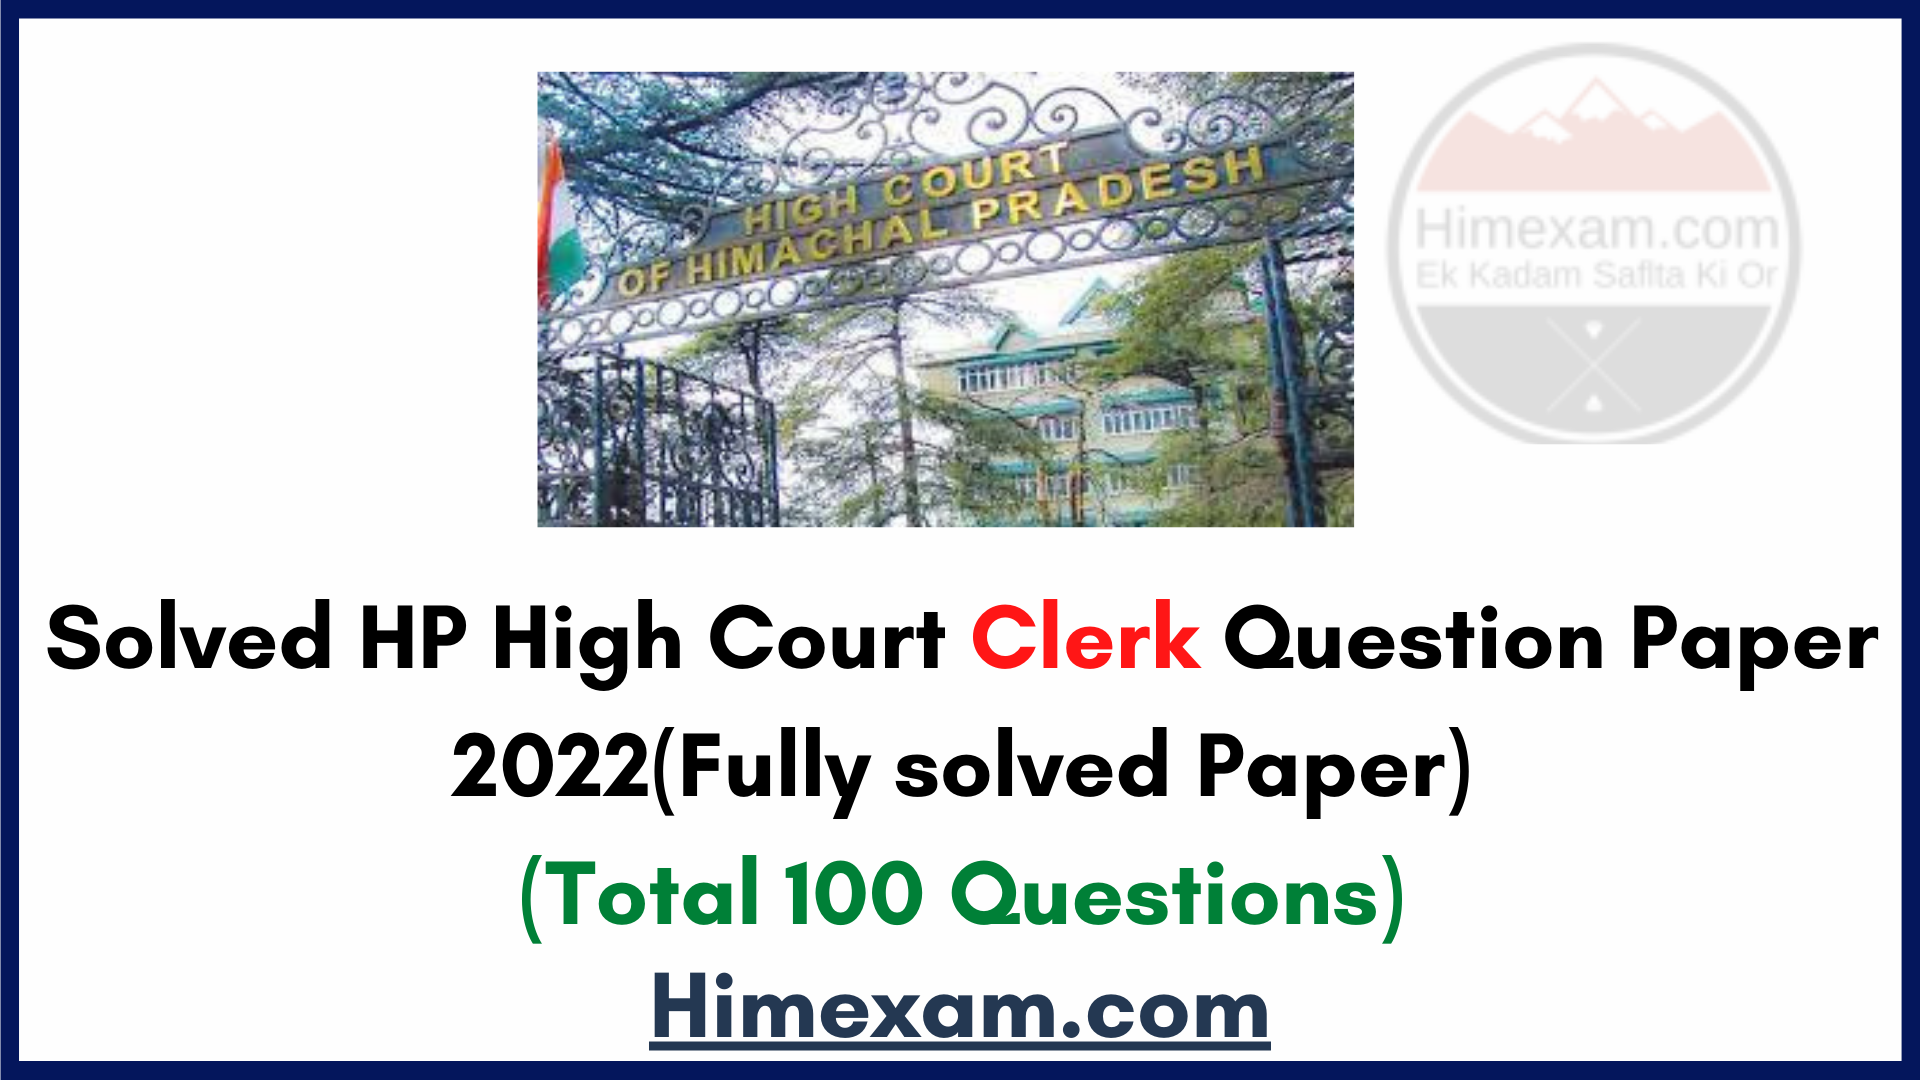 Solved HP High Court Clerk Question Paper 2022